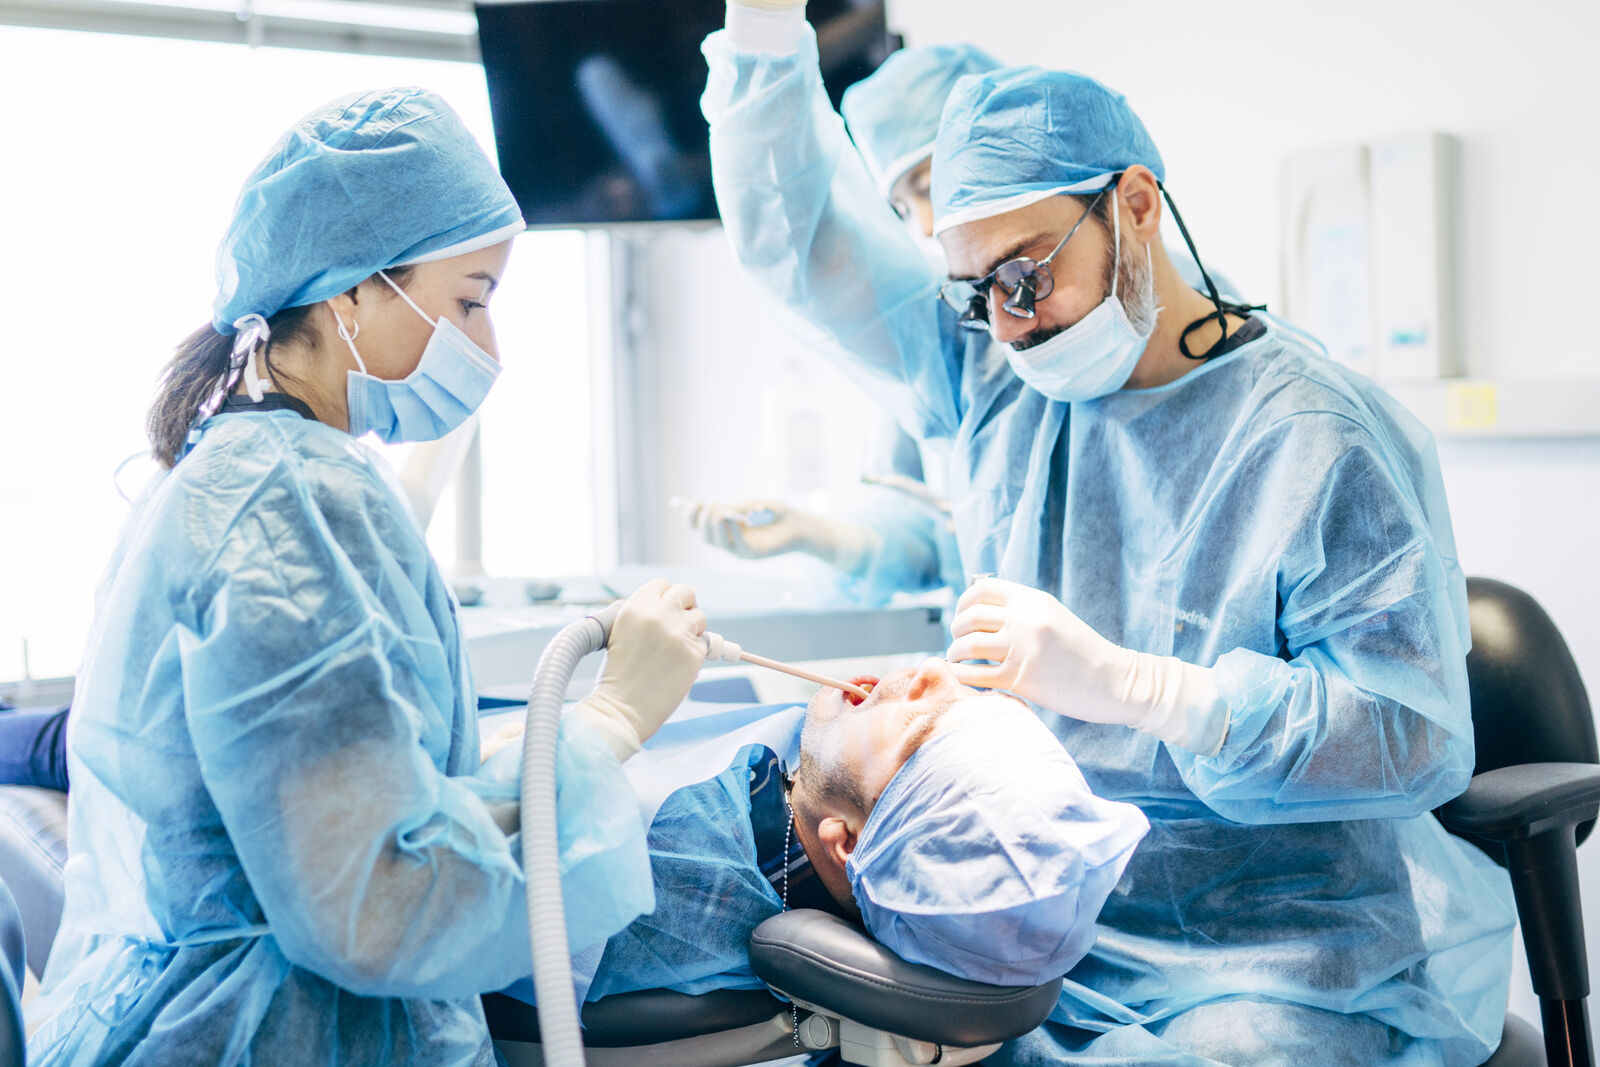 Oral Surgeons Performing Work on Patient